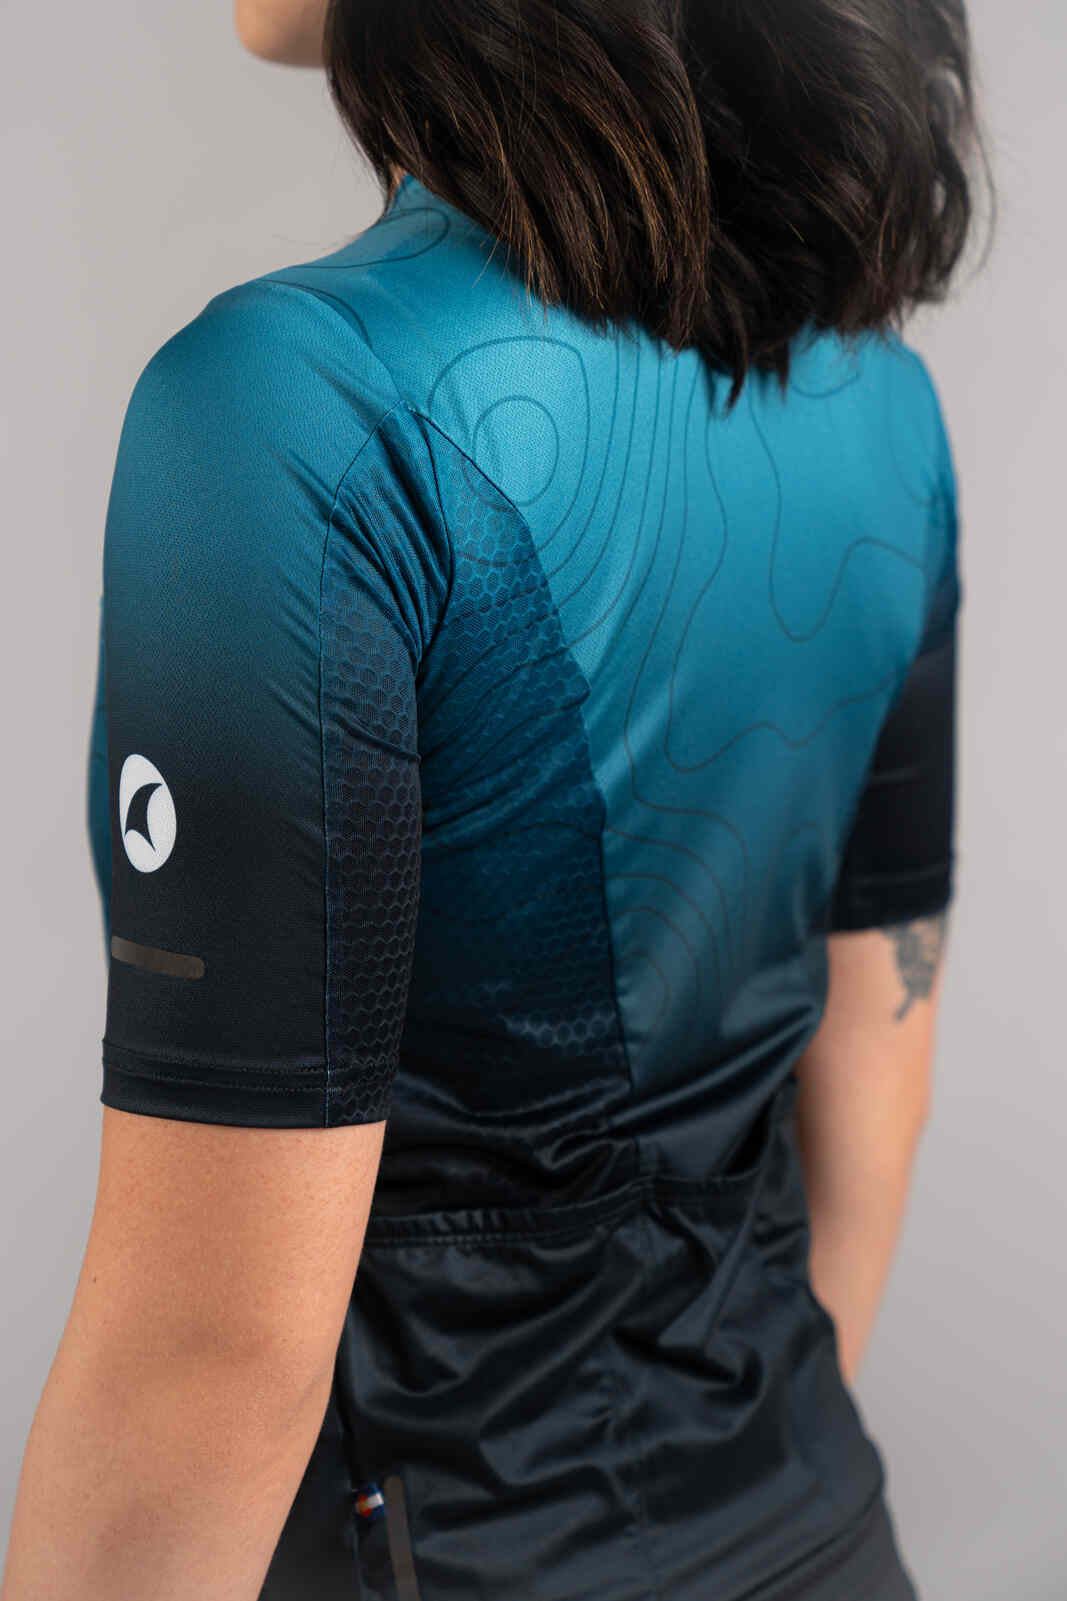 Women's Blue Ombre Summit Loose-Fit Cycling Jersey - Mesh Underarm Fabric